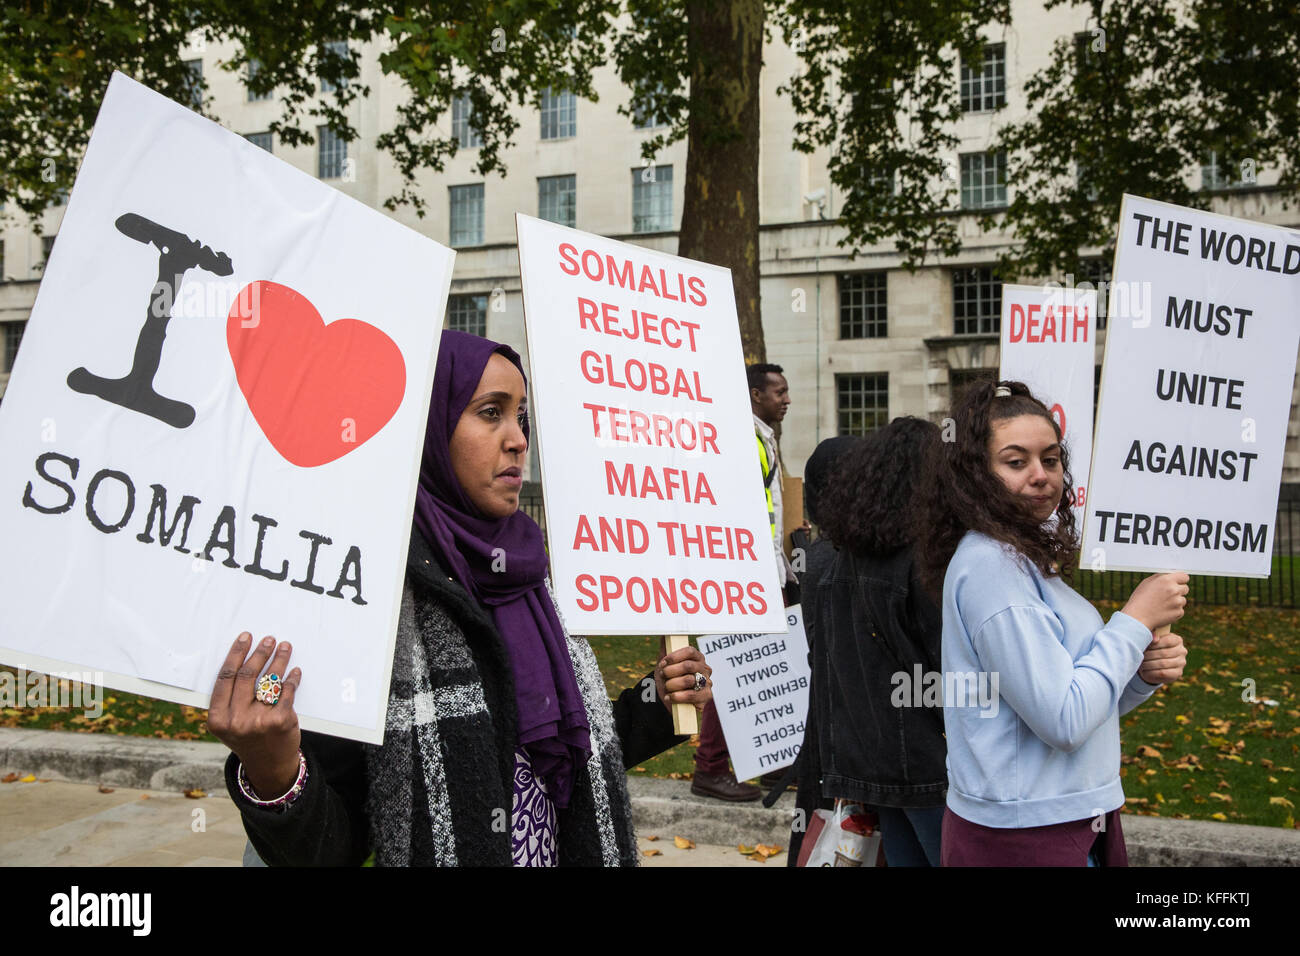 London, UK. 28th October, 2017. Members of the Somali community protest opposite Downing Street against the recent terrorist attacks in Somalia and call for assistance from the British Government. Credit: Mark Kerrison/Alamy Live News Stock Photo